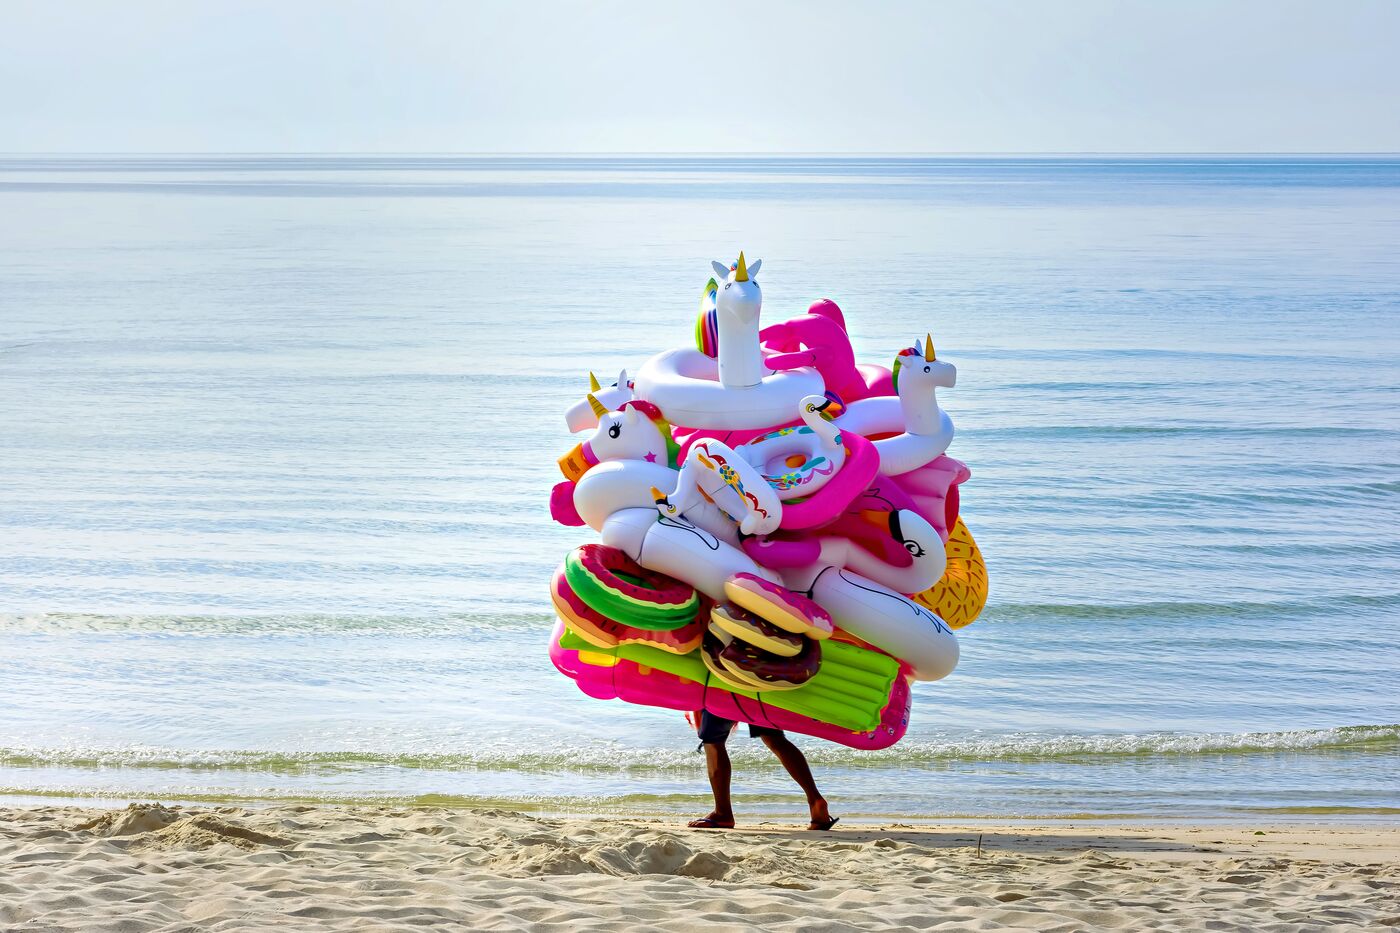 Carrying inflatables on the beach